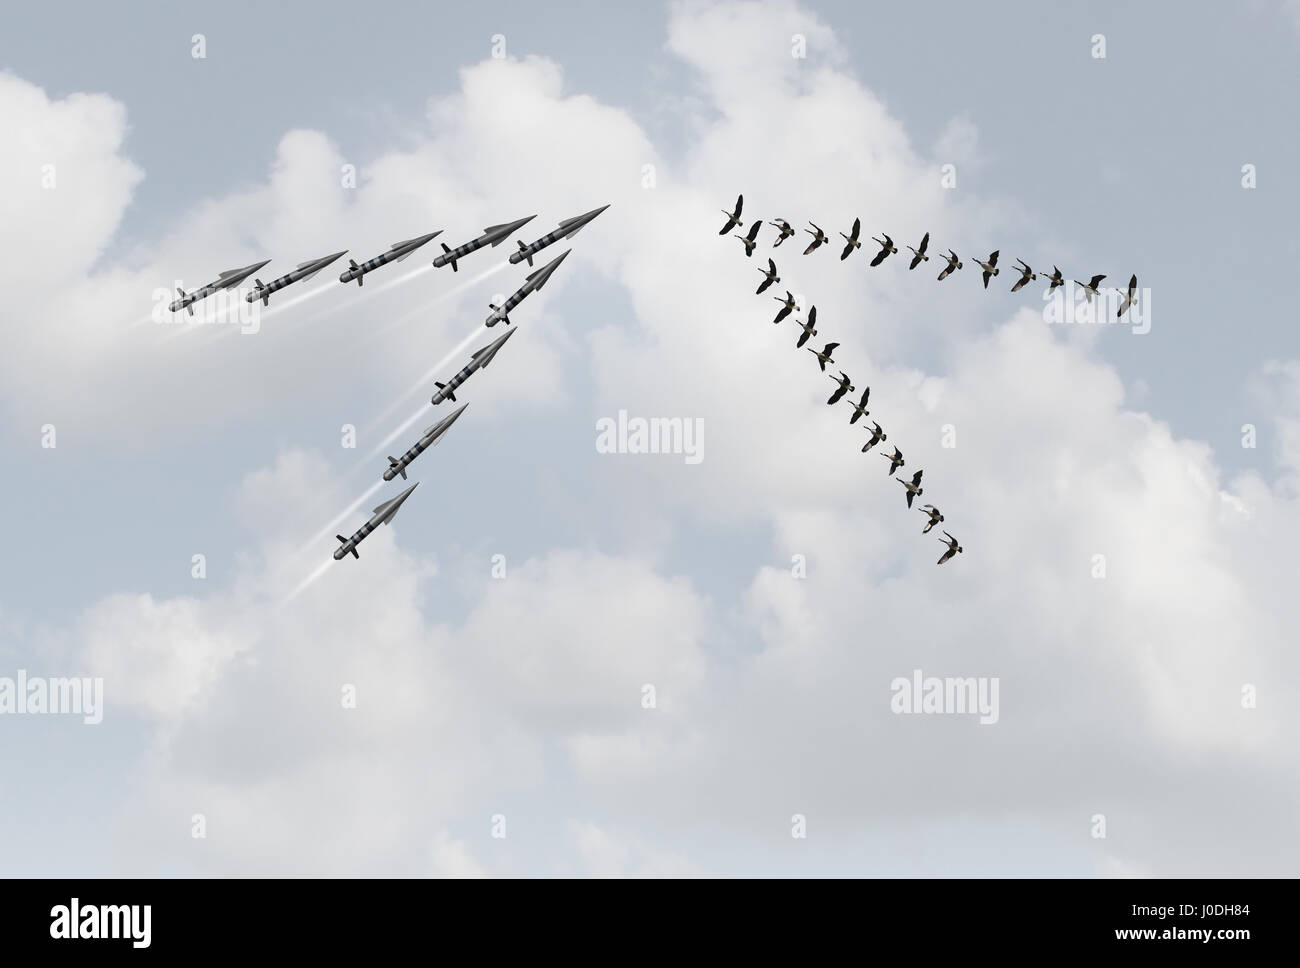 War peace concept as a group of peaceful geese in a v formation facing dangerous missiles as a metaphor for violence versus pacifism. Stock Photo